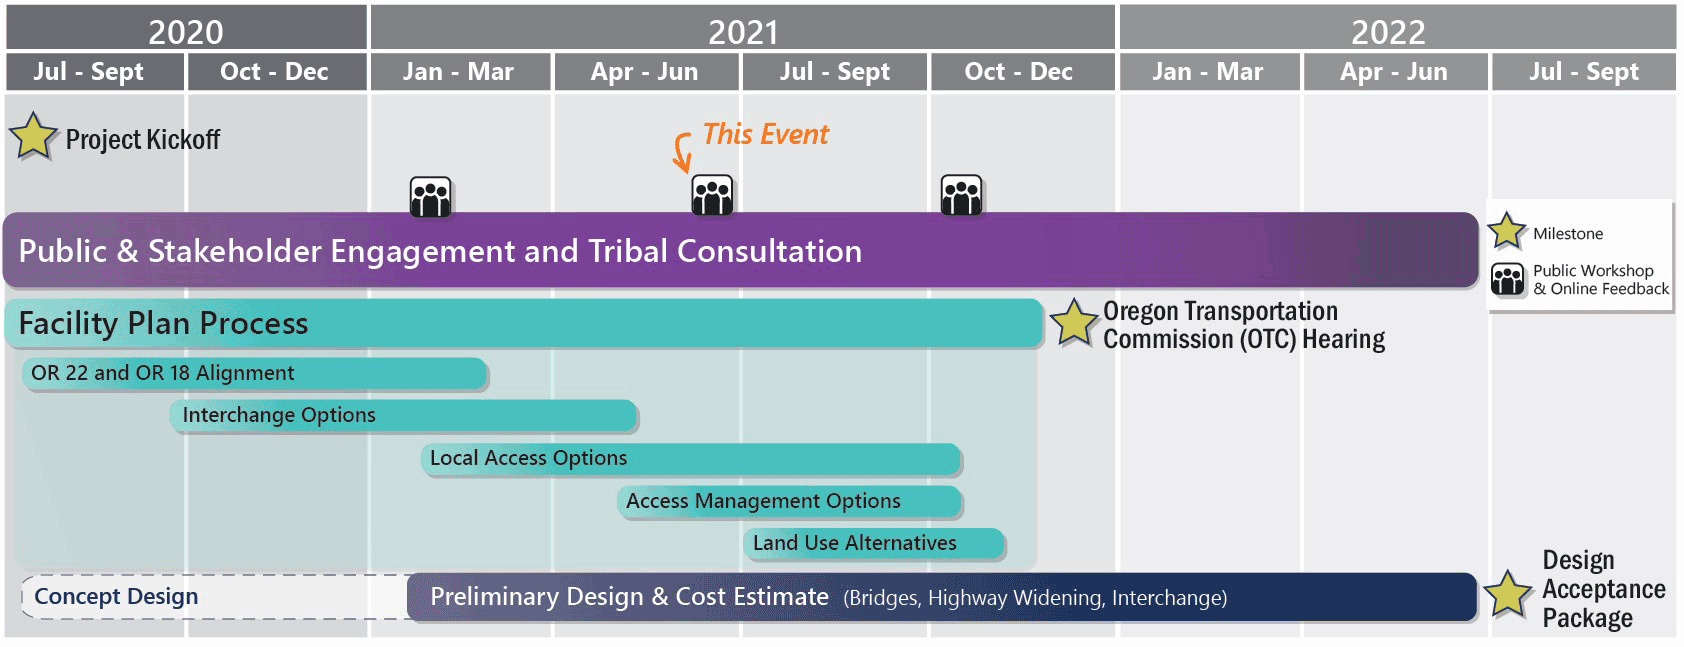 A timeline is shown from summer 2020 to summer 2022, with public outreach taking place from the start through spring 2022. Online feedback is shown at fall 2020, spring 2021 (this event), and fall 2021 (September). The Facility planning process takes place from summer 2020 through fall 2021. With the design process from spring 2021 through spring 2022 and the Design Acceptance Package happening in summer 2022. 